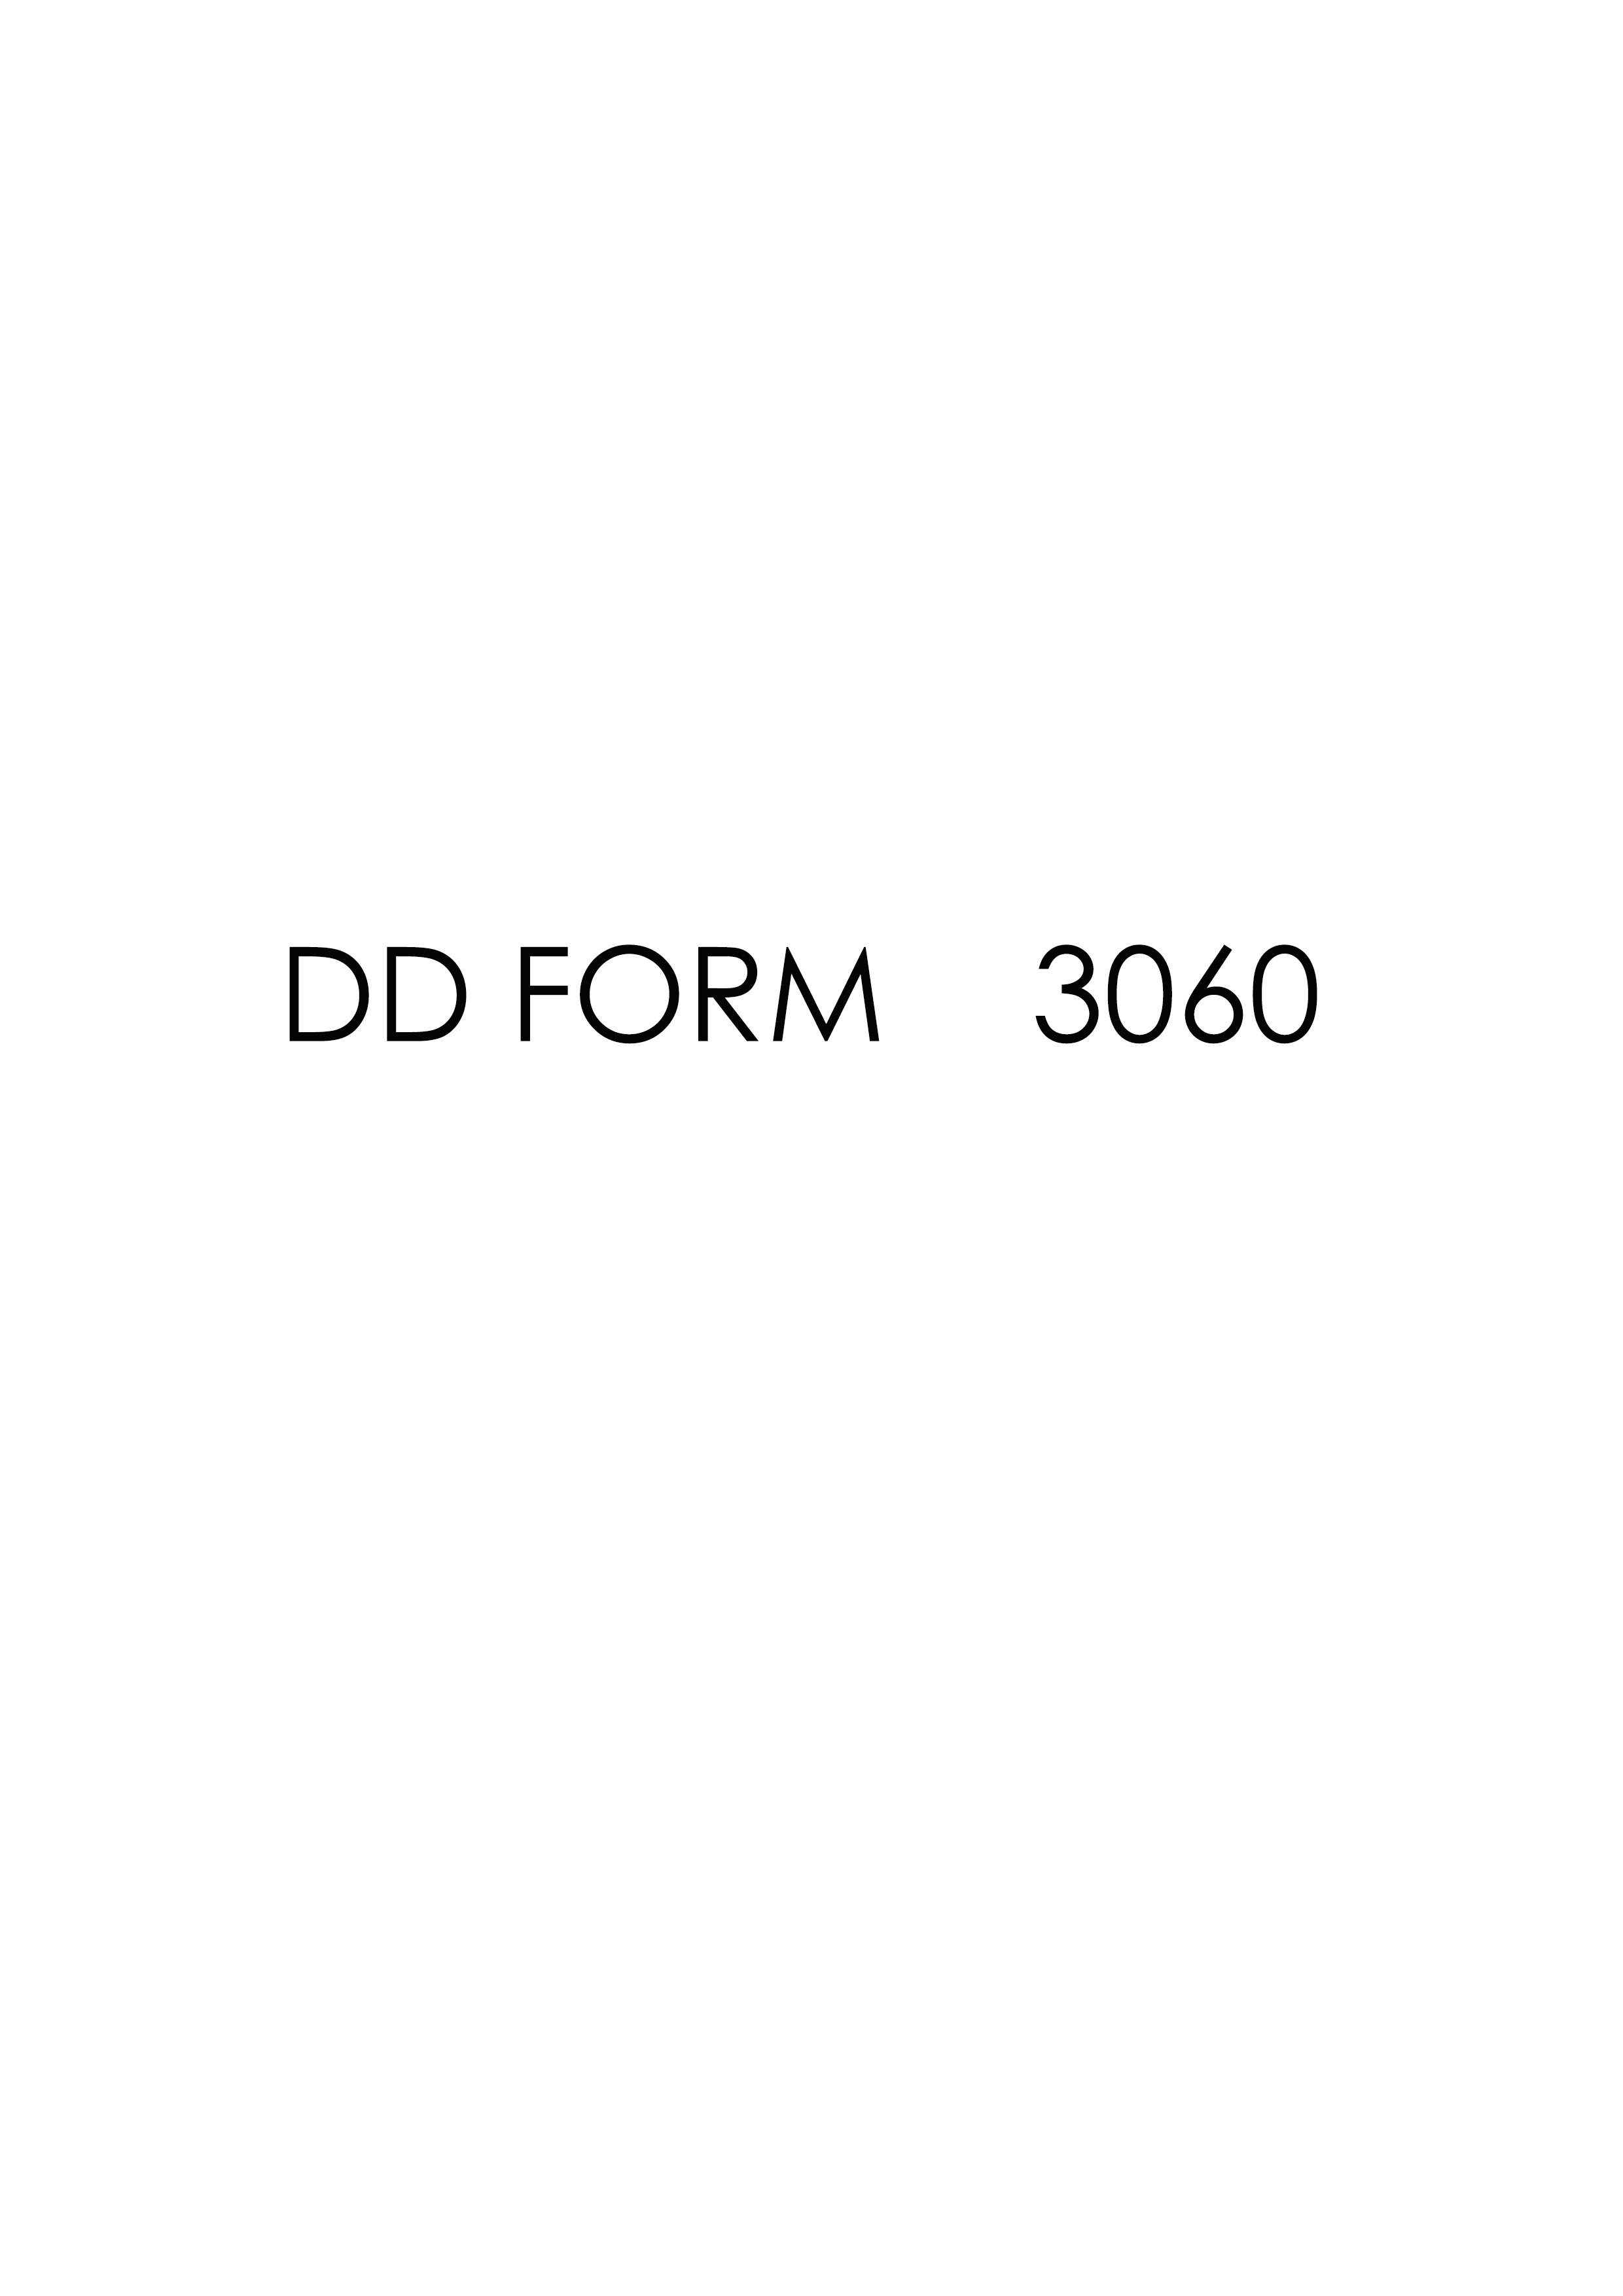 Download Fillable dd Form 3060